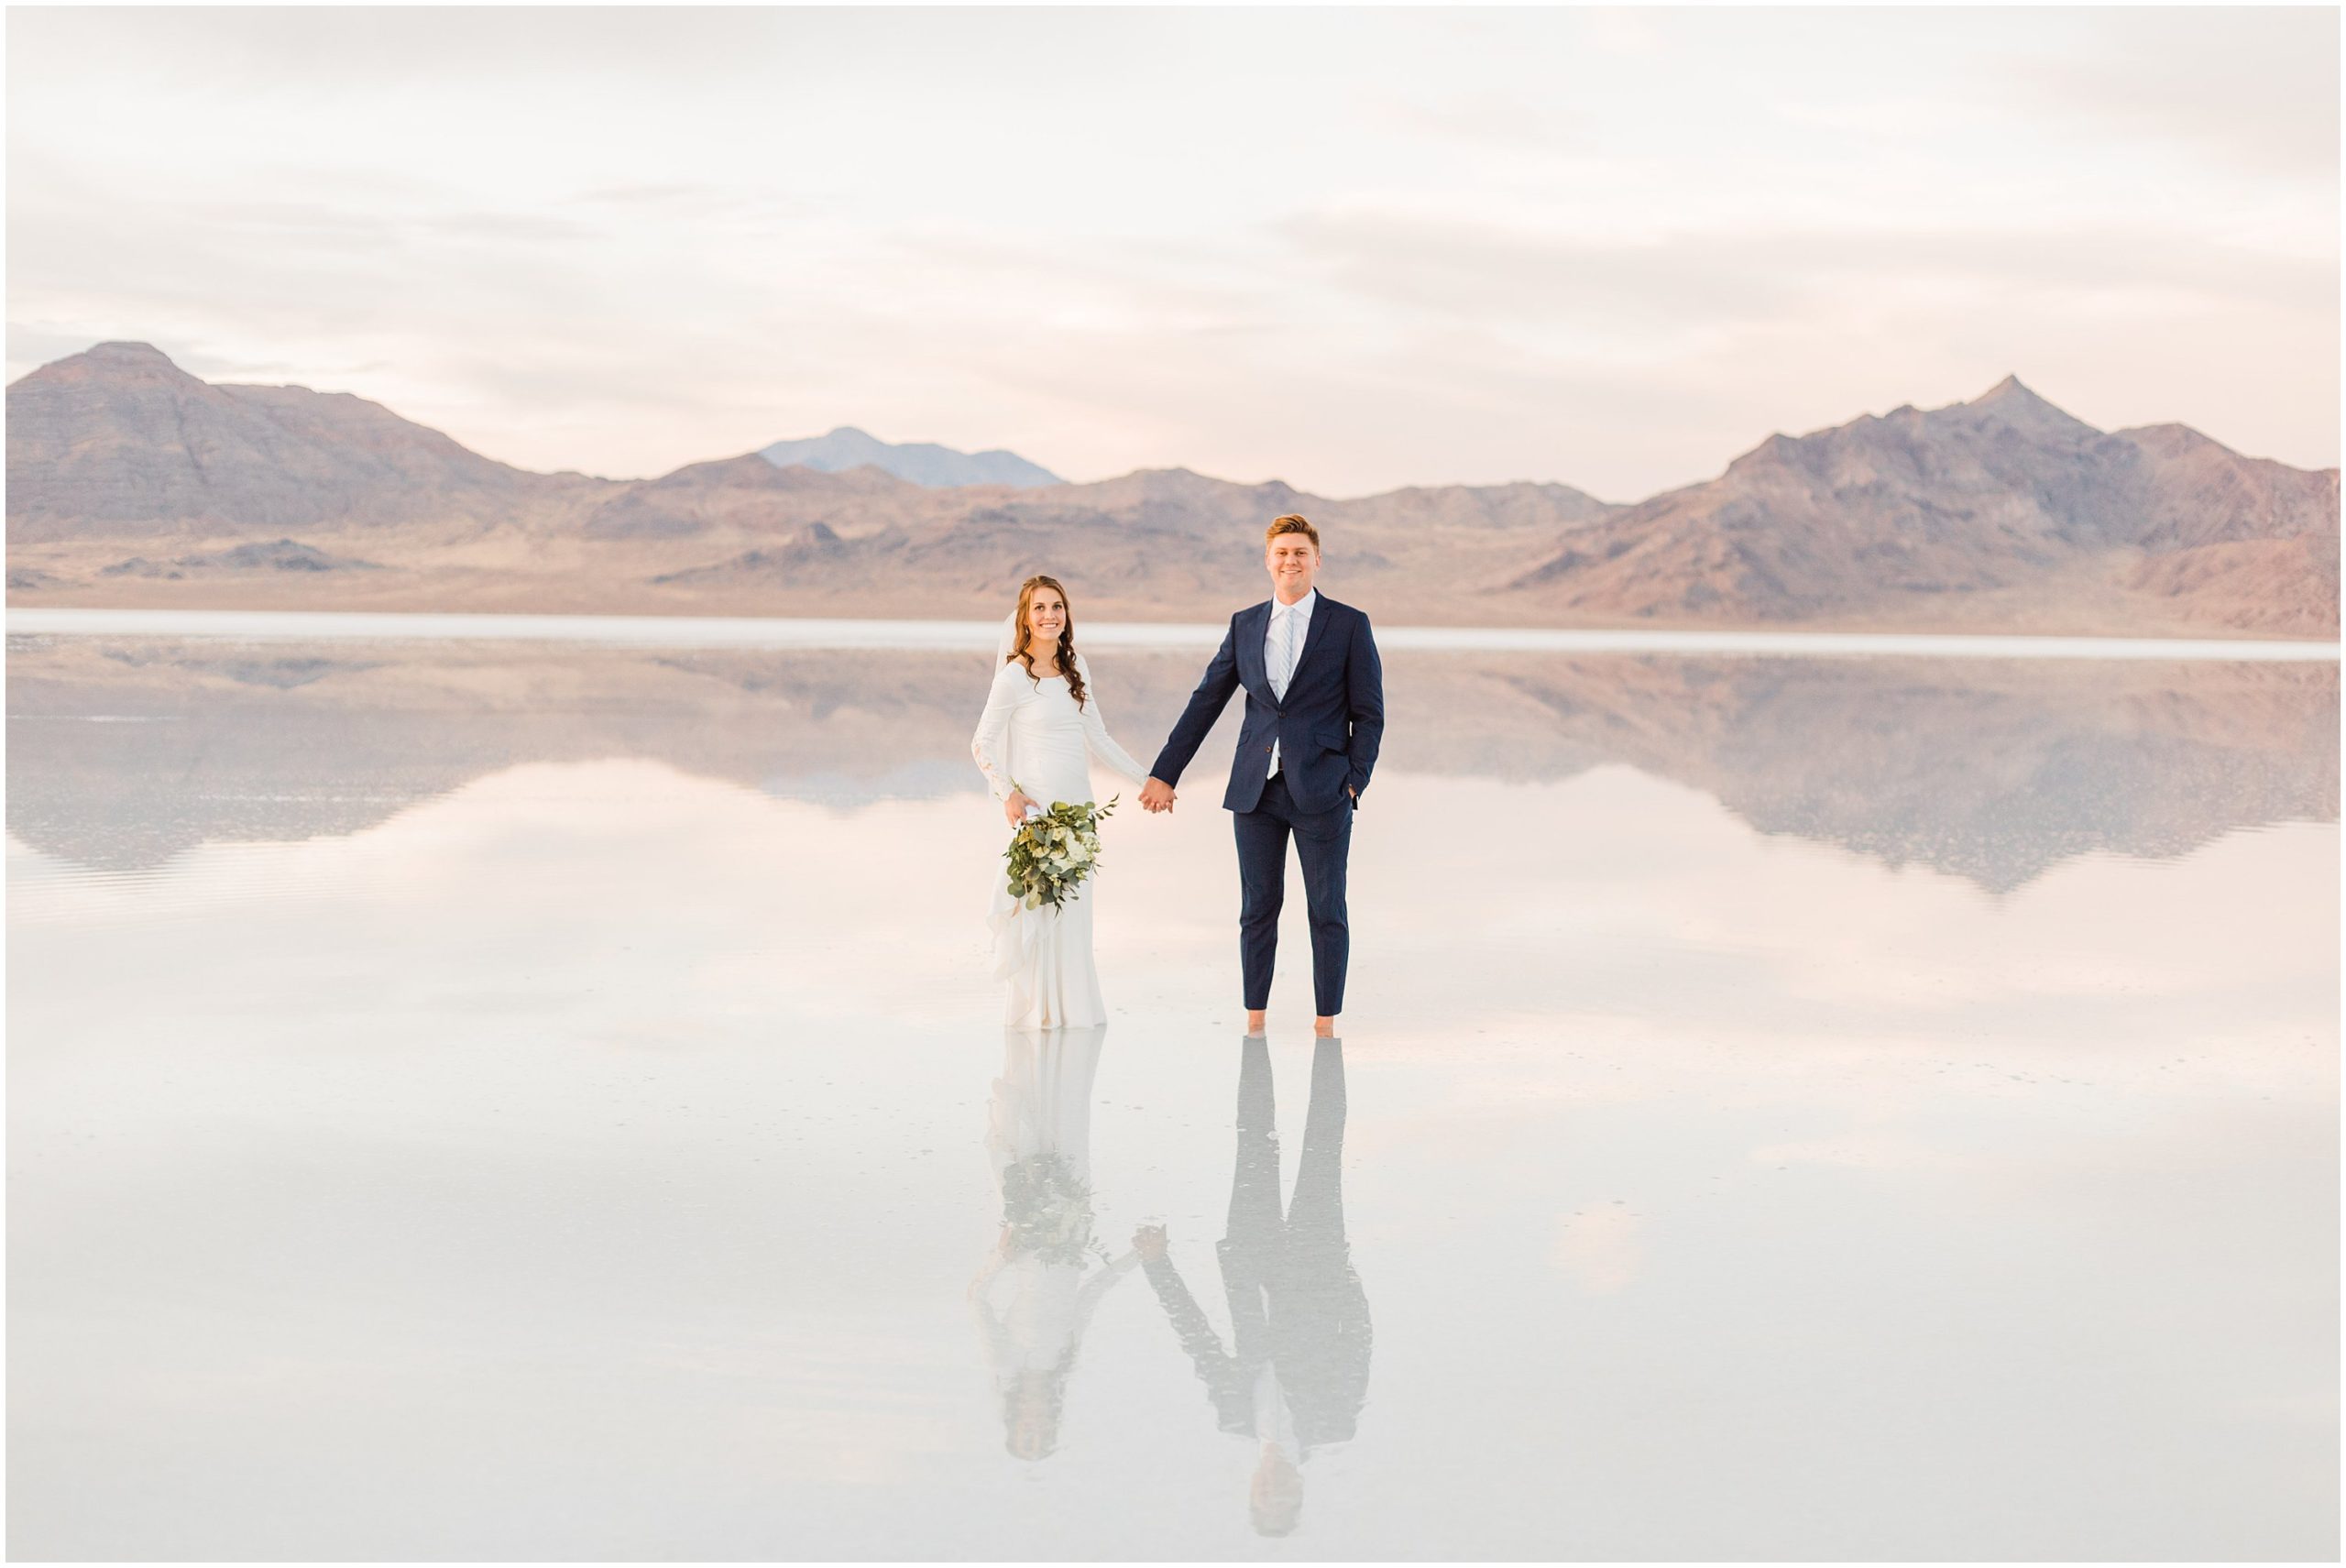 Bonneville salt flats photographer everything you need to know for pictures